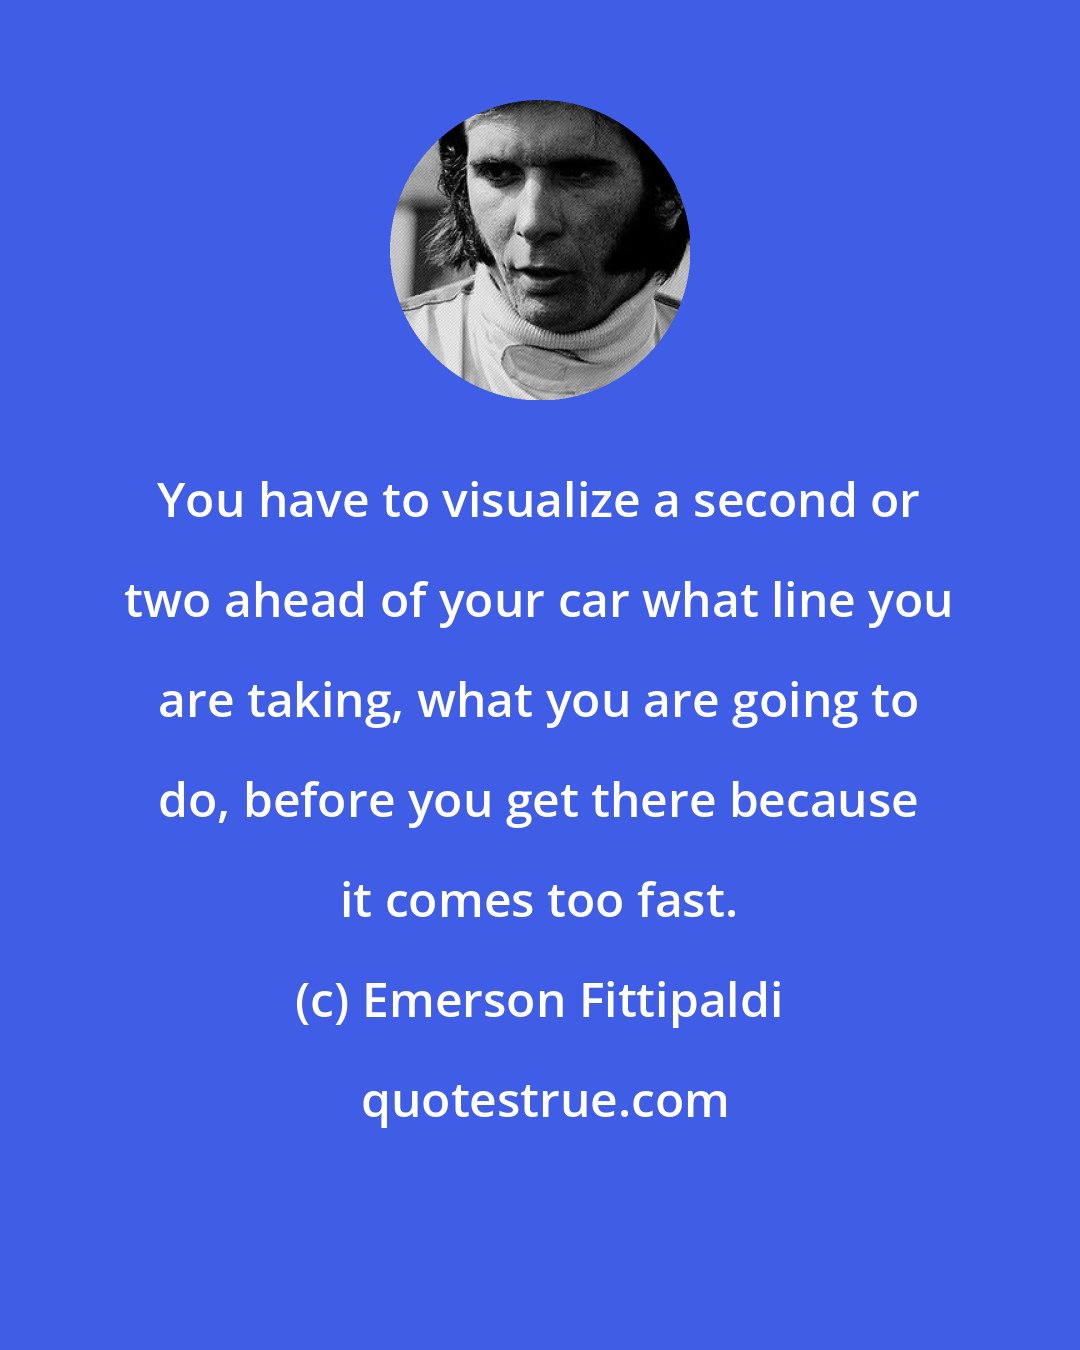 Emerson Fittipaldi: You have to visualize a second or two ahead of your car what line you are taking, what you are going to do, before you get there because it comes too fast.